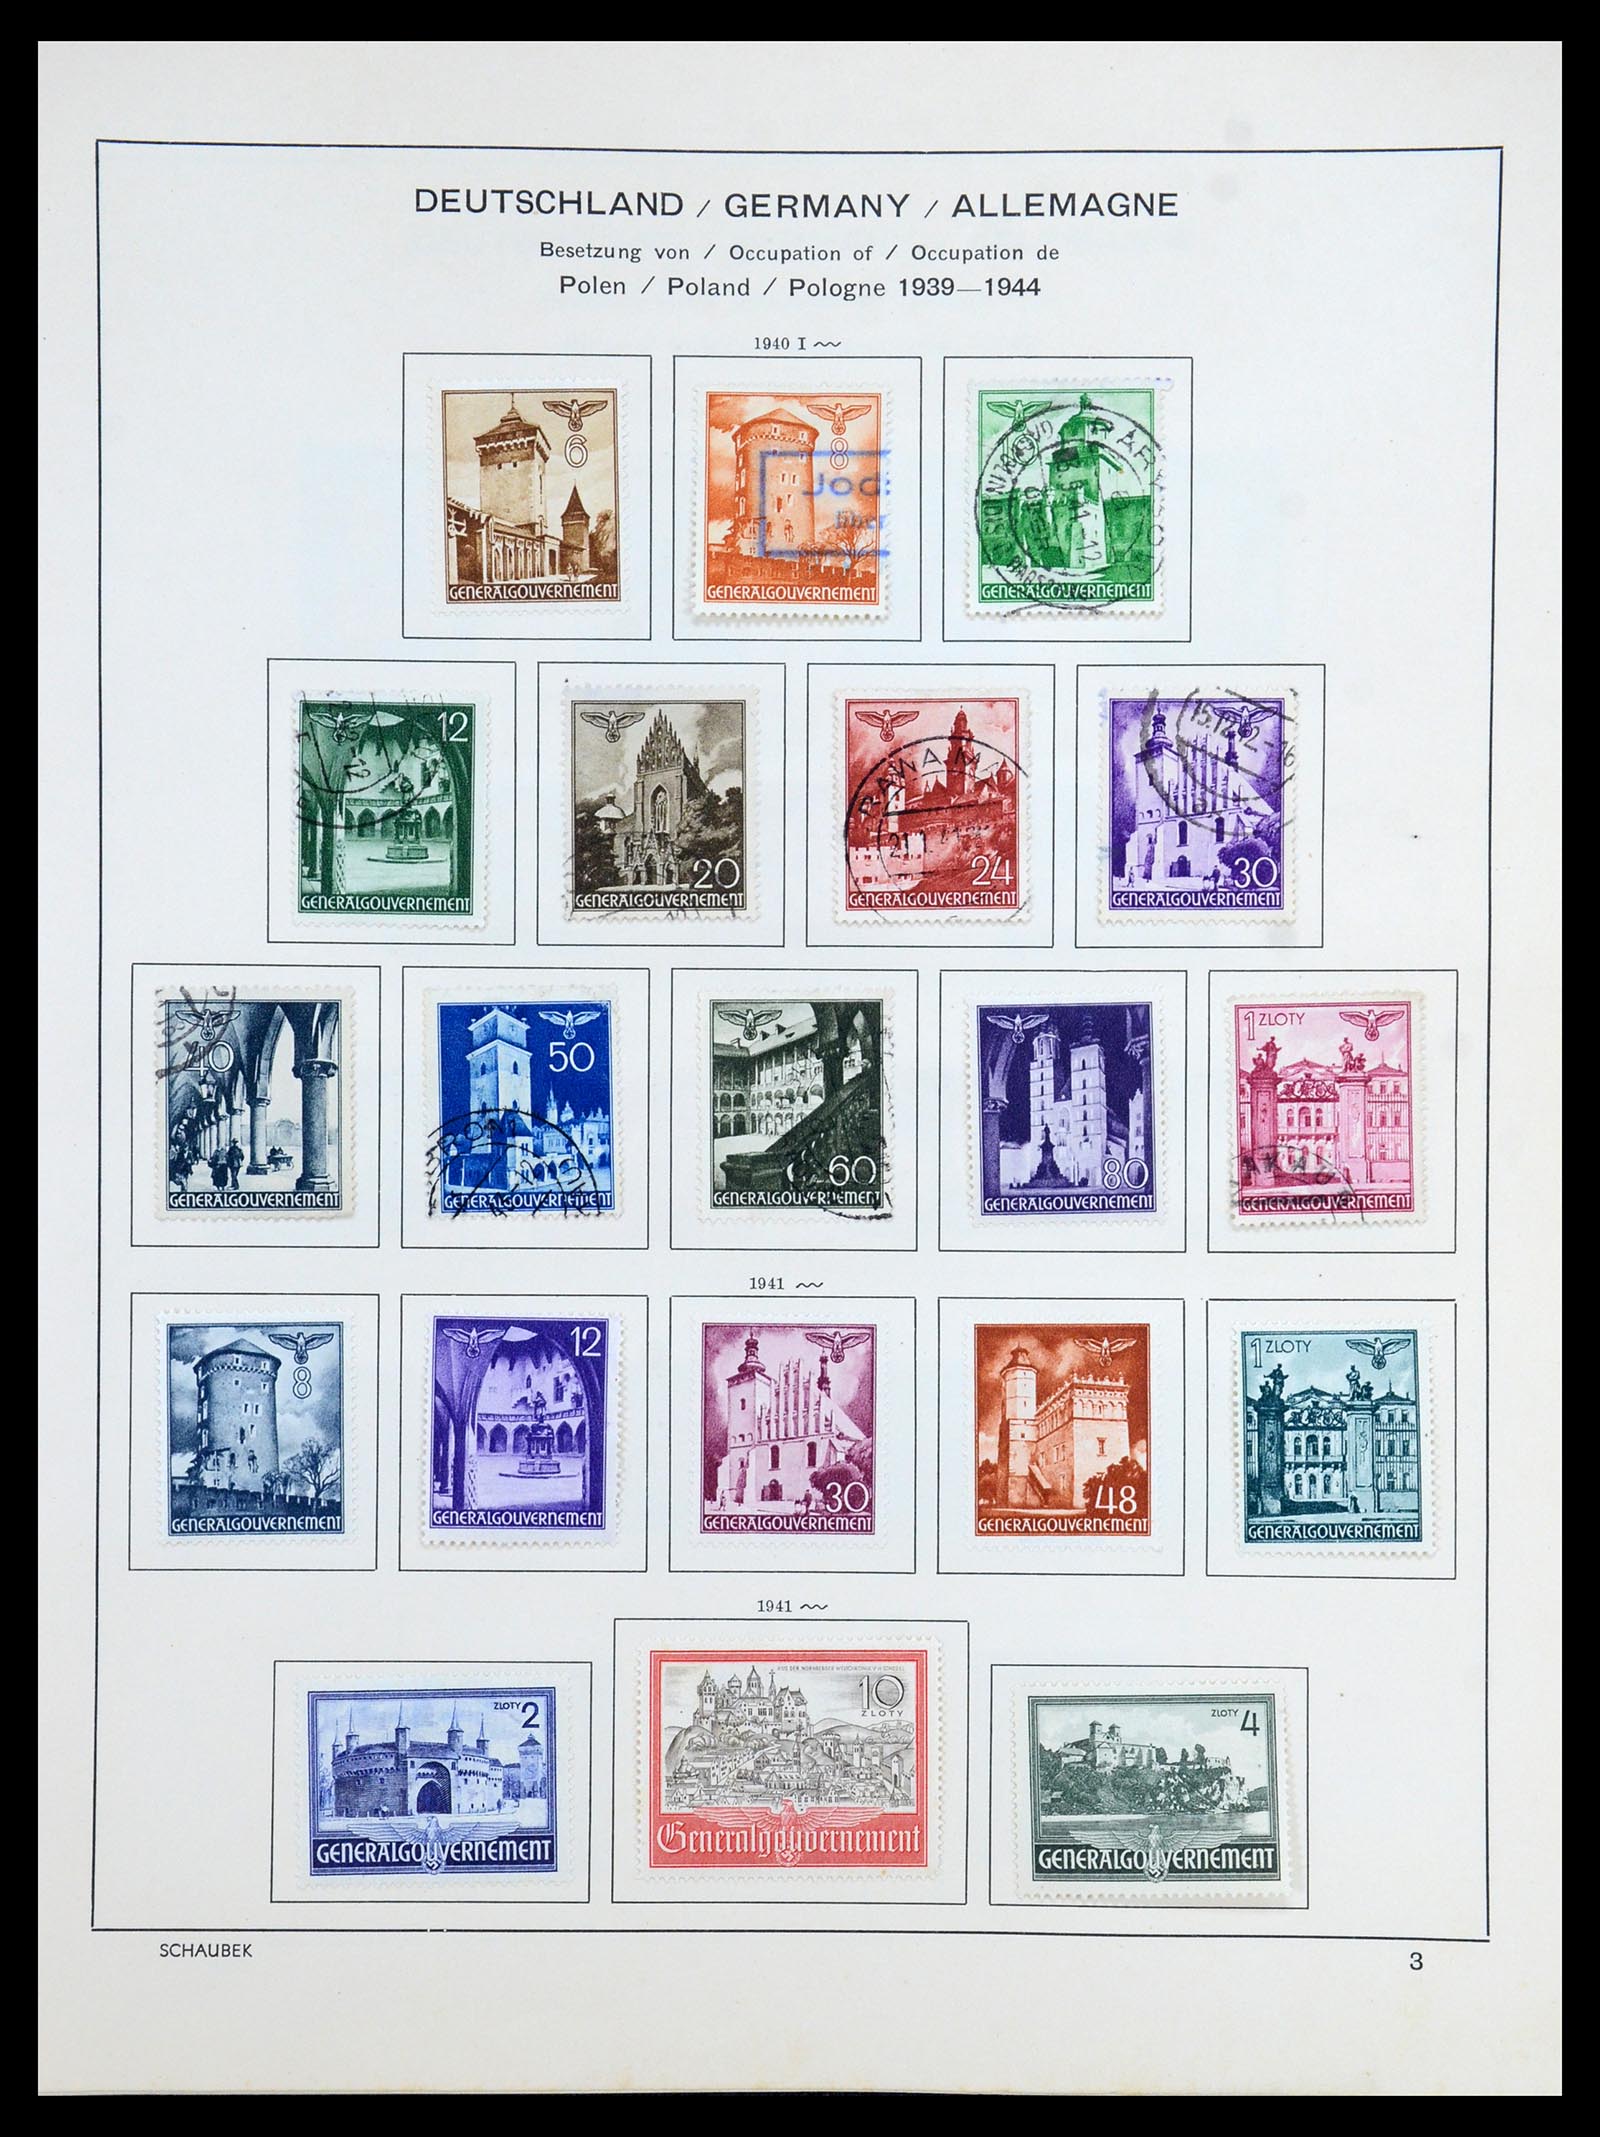 35964 011 - Stamp collection 35964 Germany occupations WW II 1939-1945.